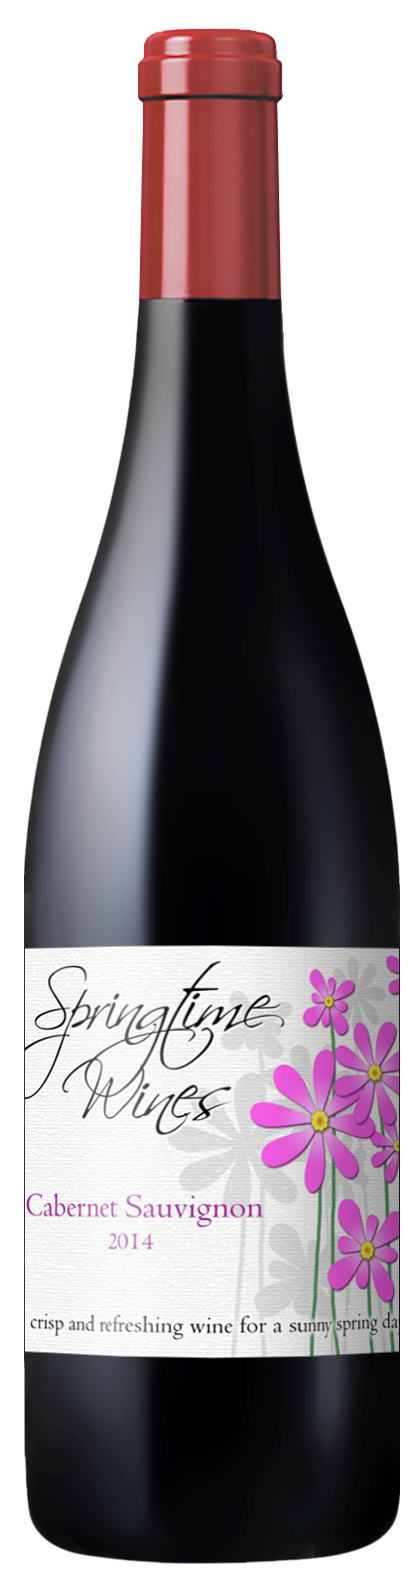 personalized custom wine label with colorful spring flowers